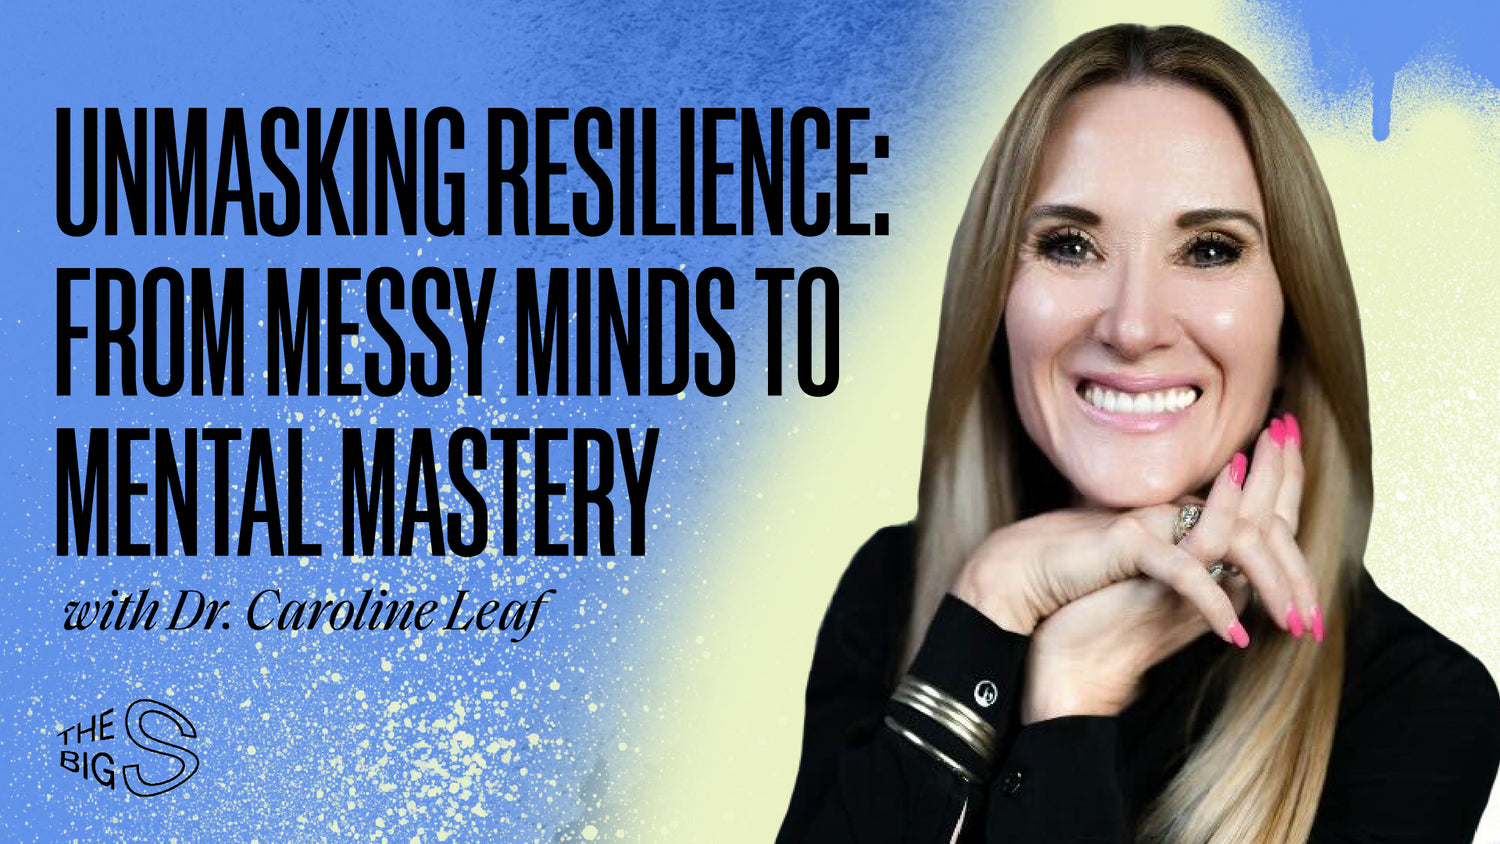 69. Unmasking Resilience: From Messy Minds to Mental Mastery with Dr. Caroline Leaf